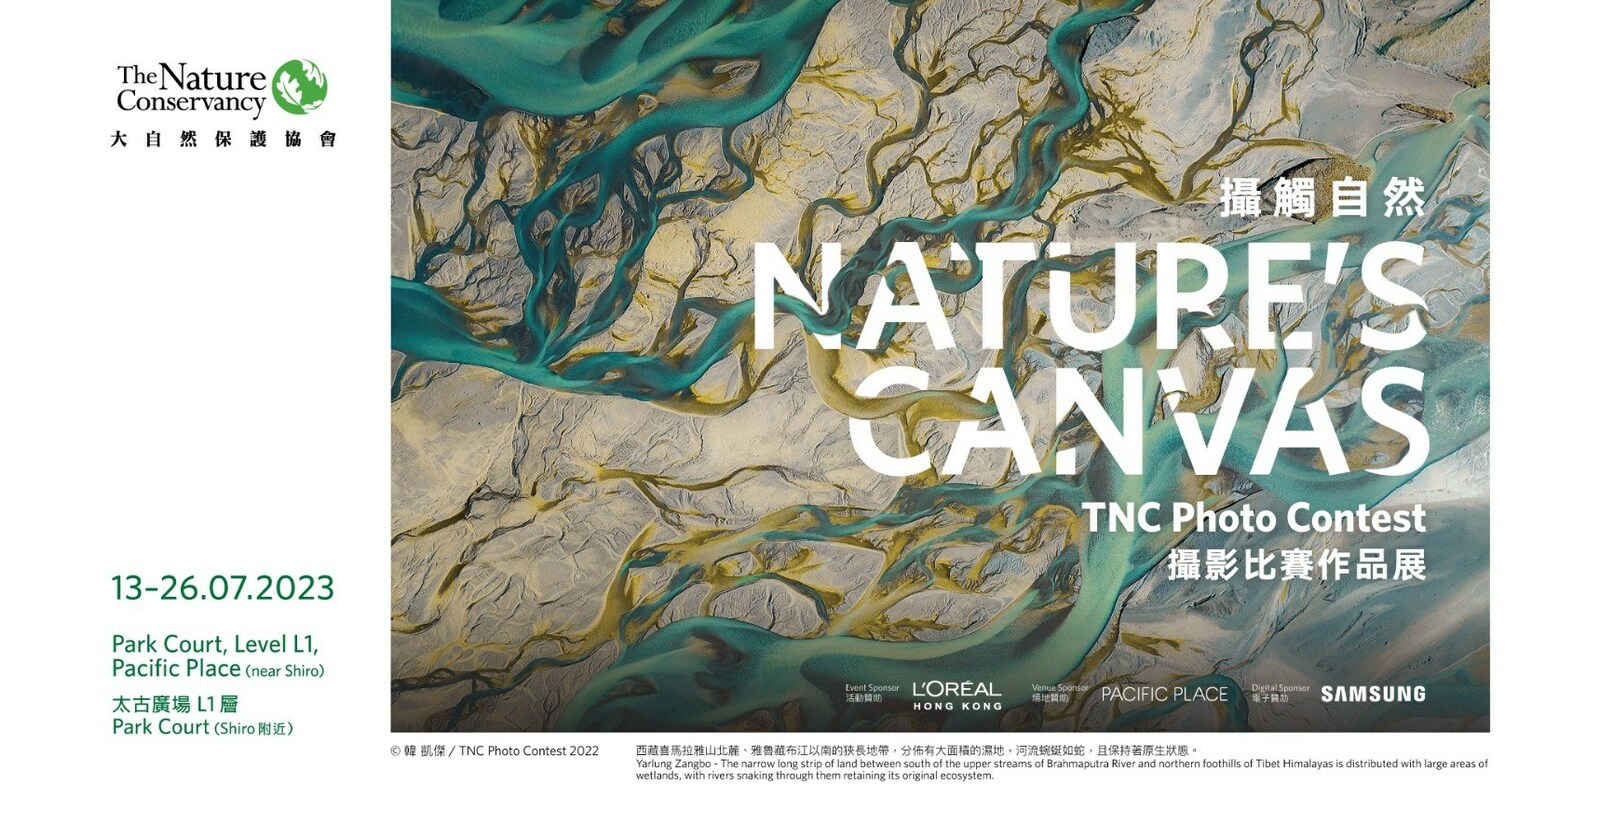 The Nature Conservancy in Hong Kong